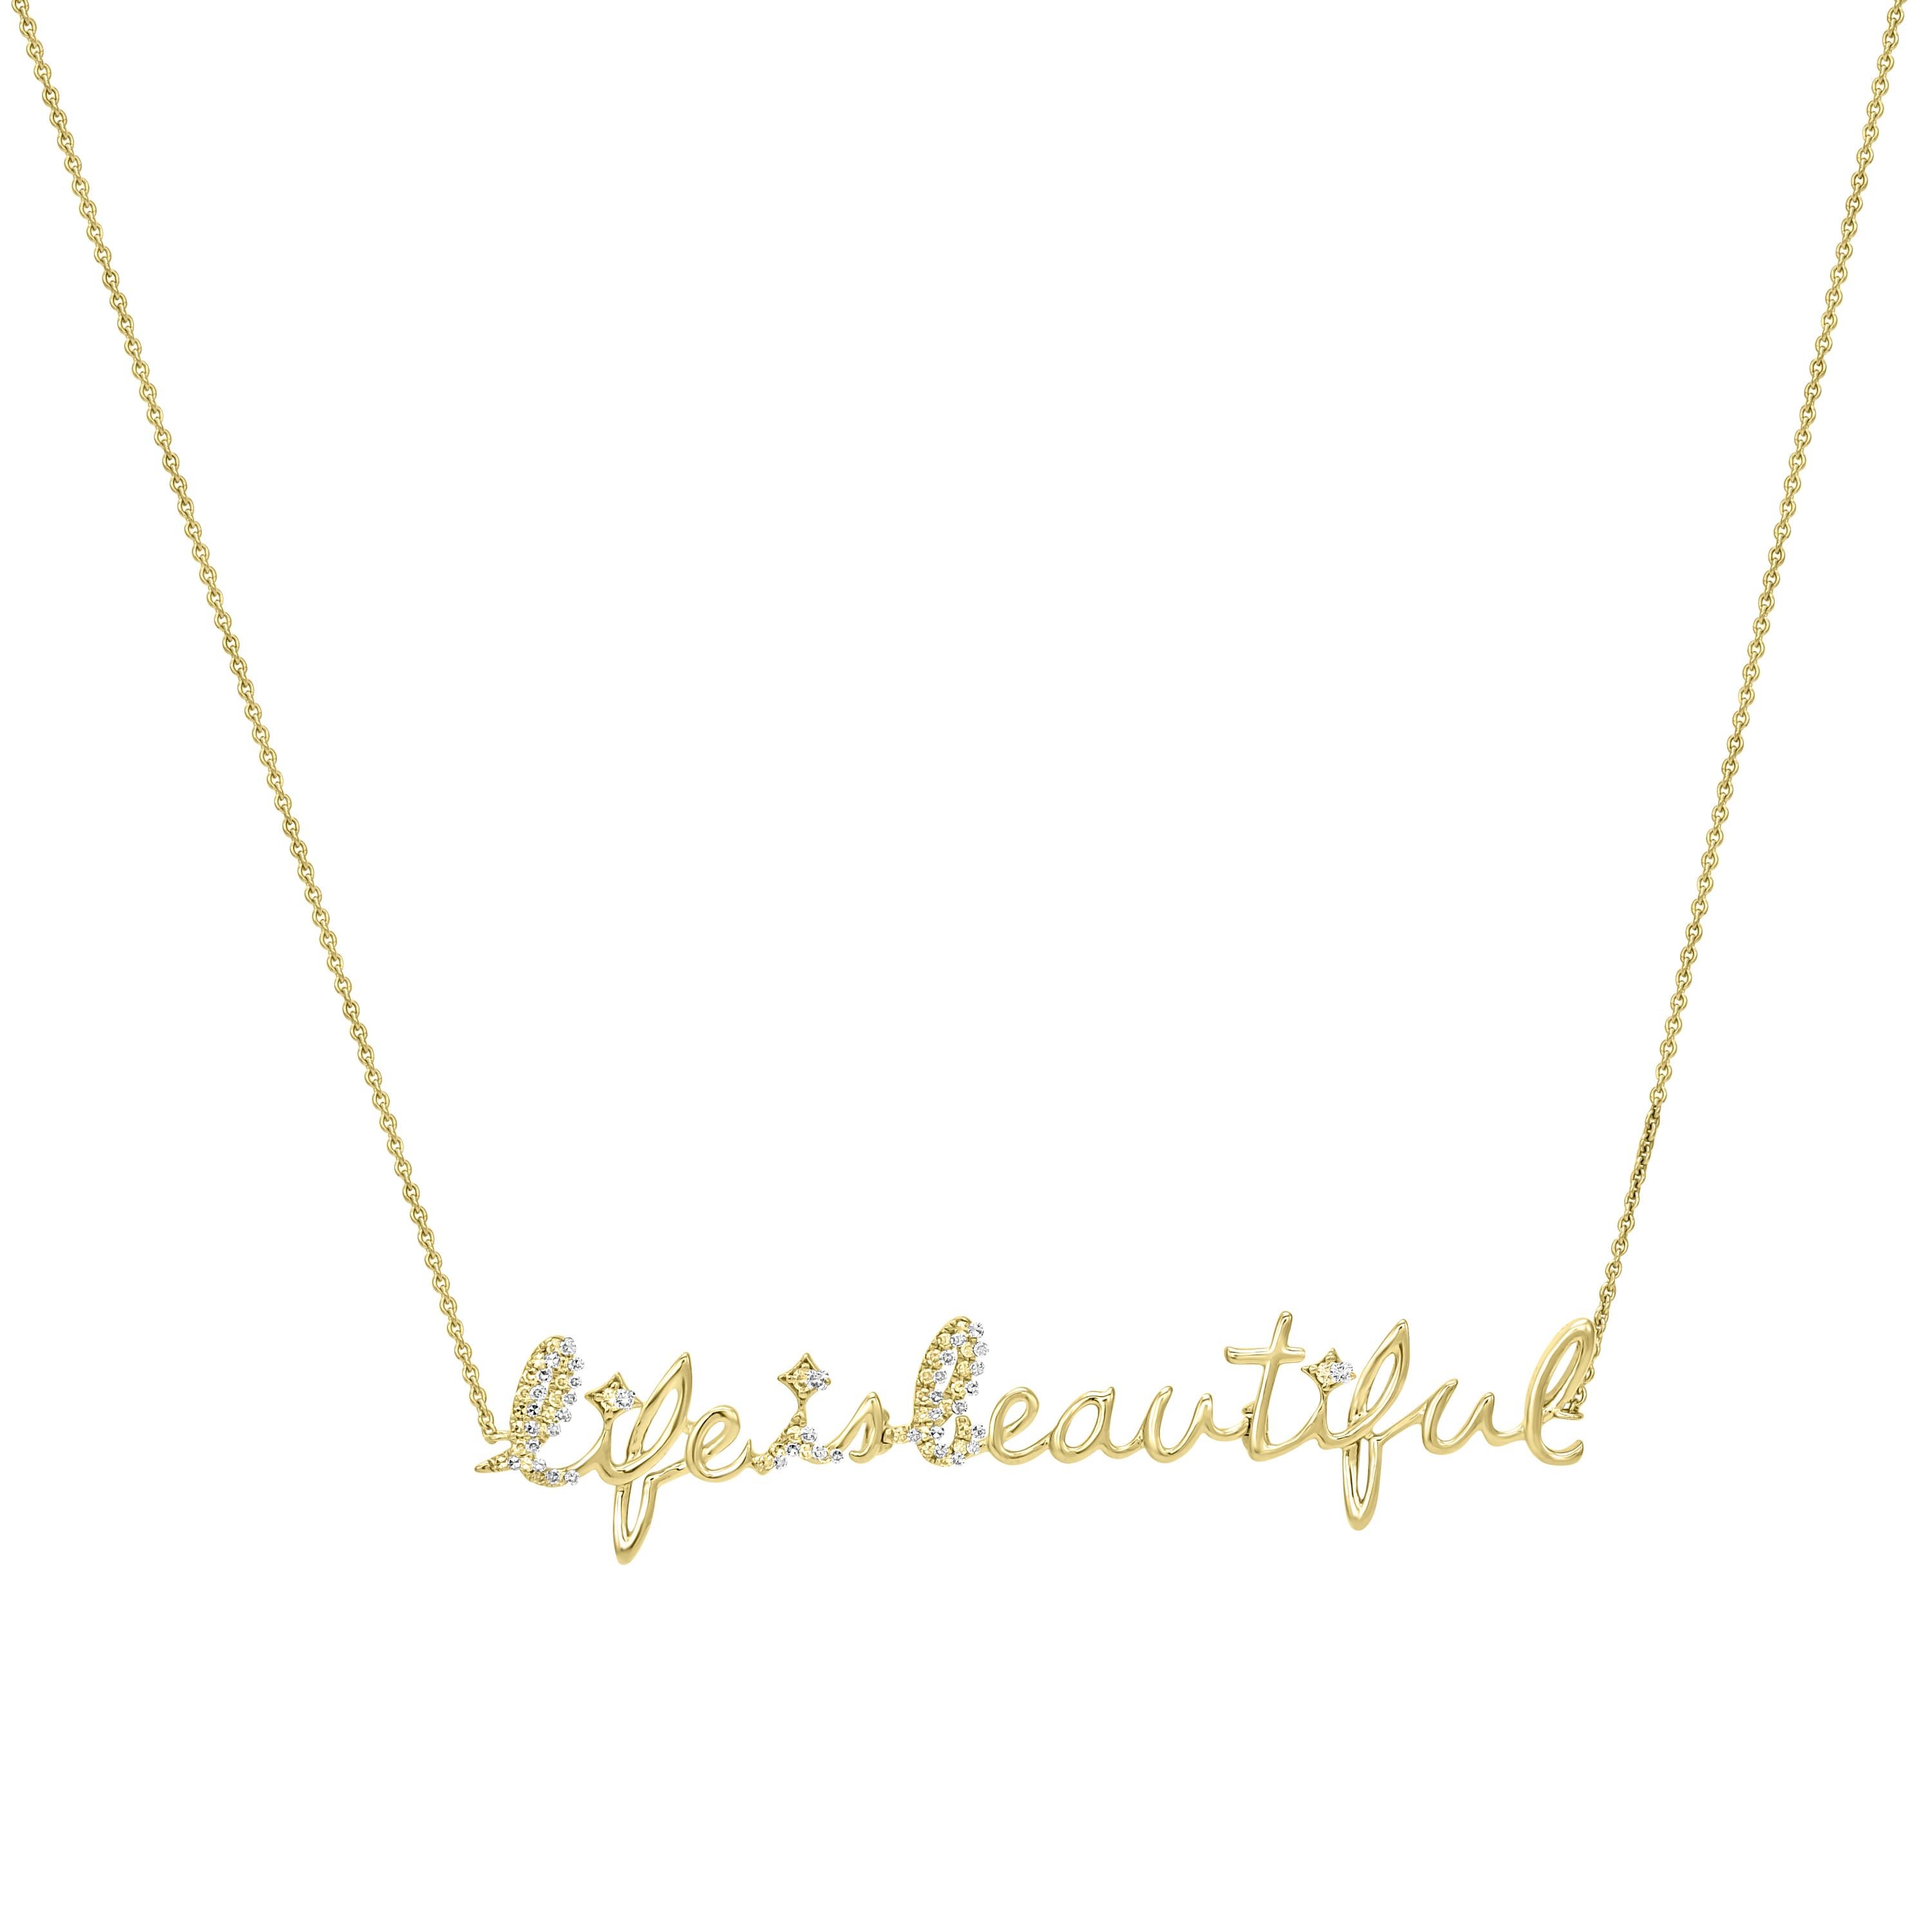 You'll love the inspired style of this Luxle 14k gold 